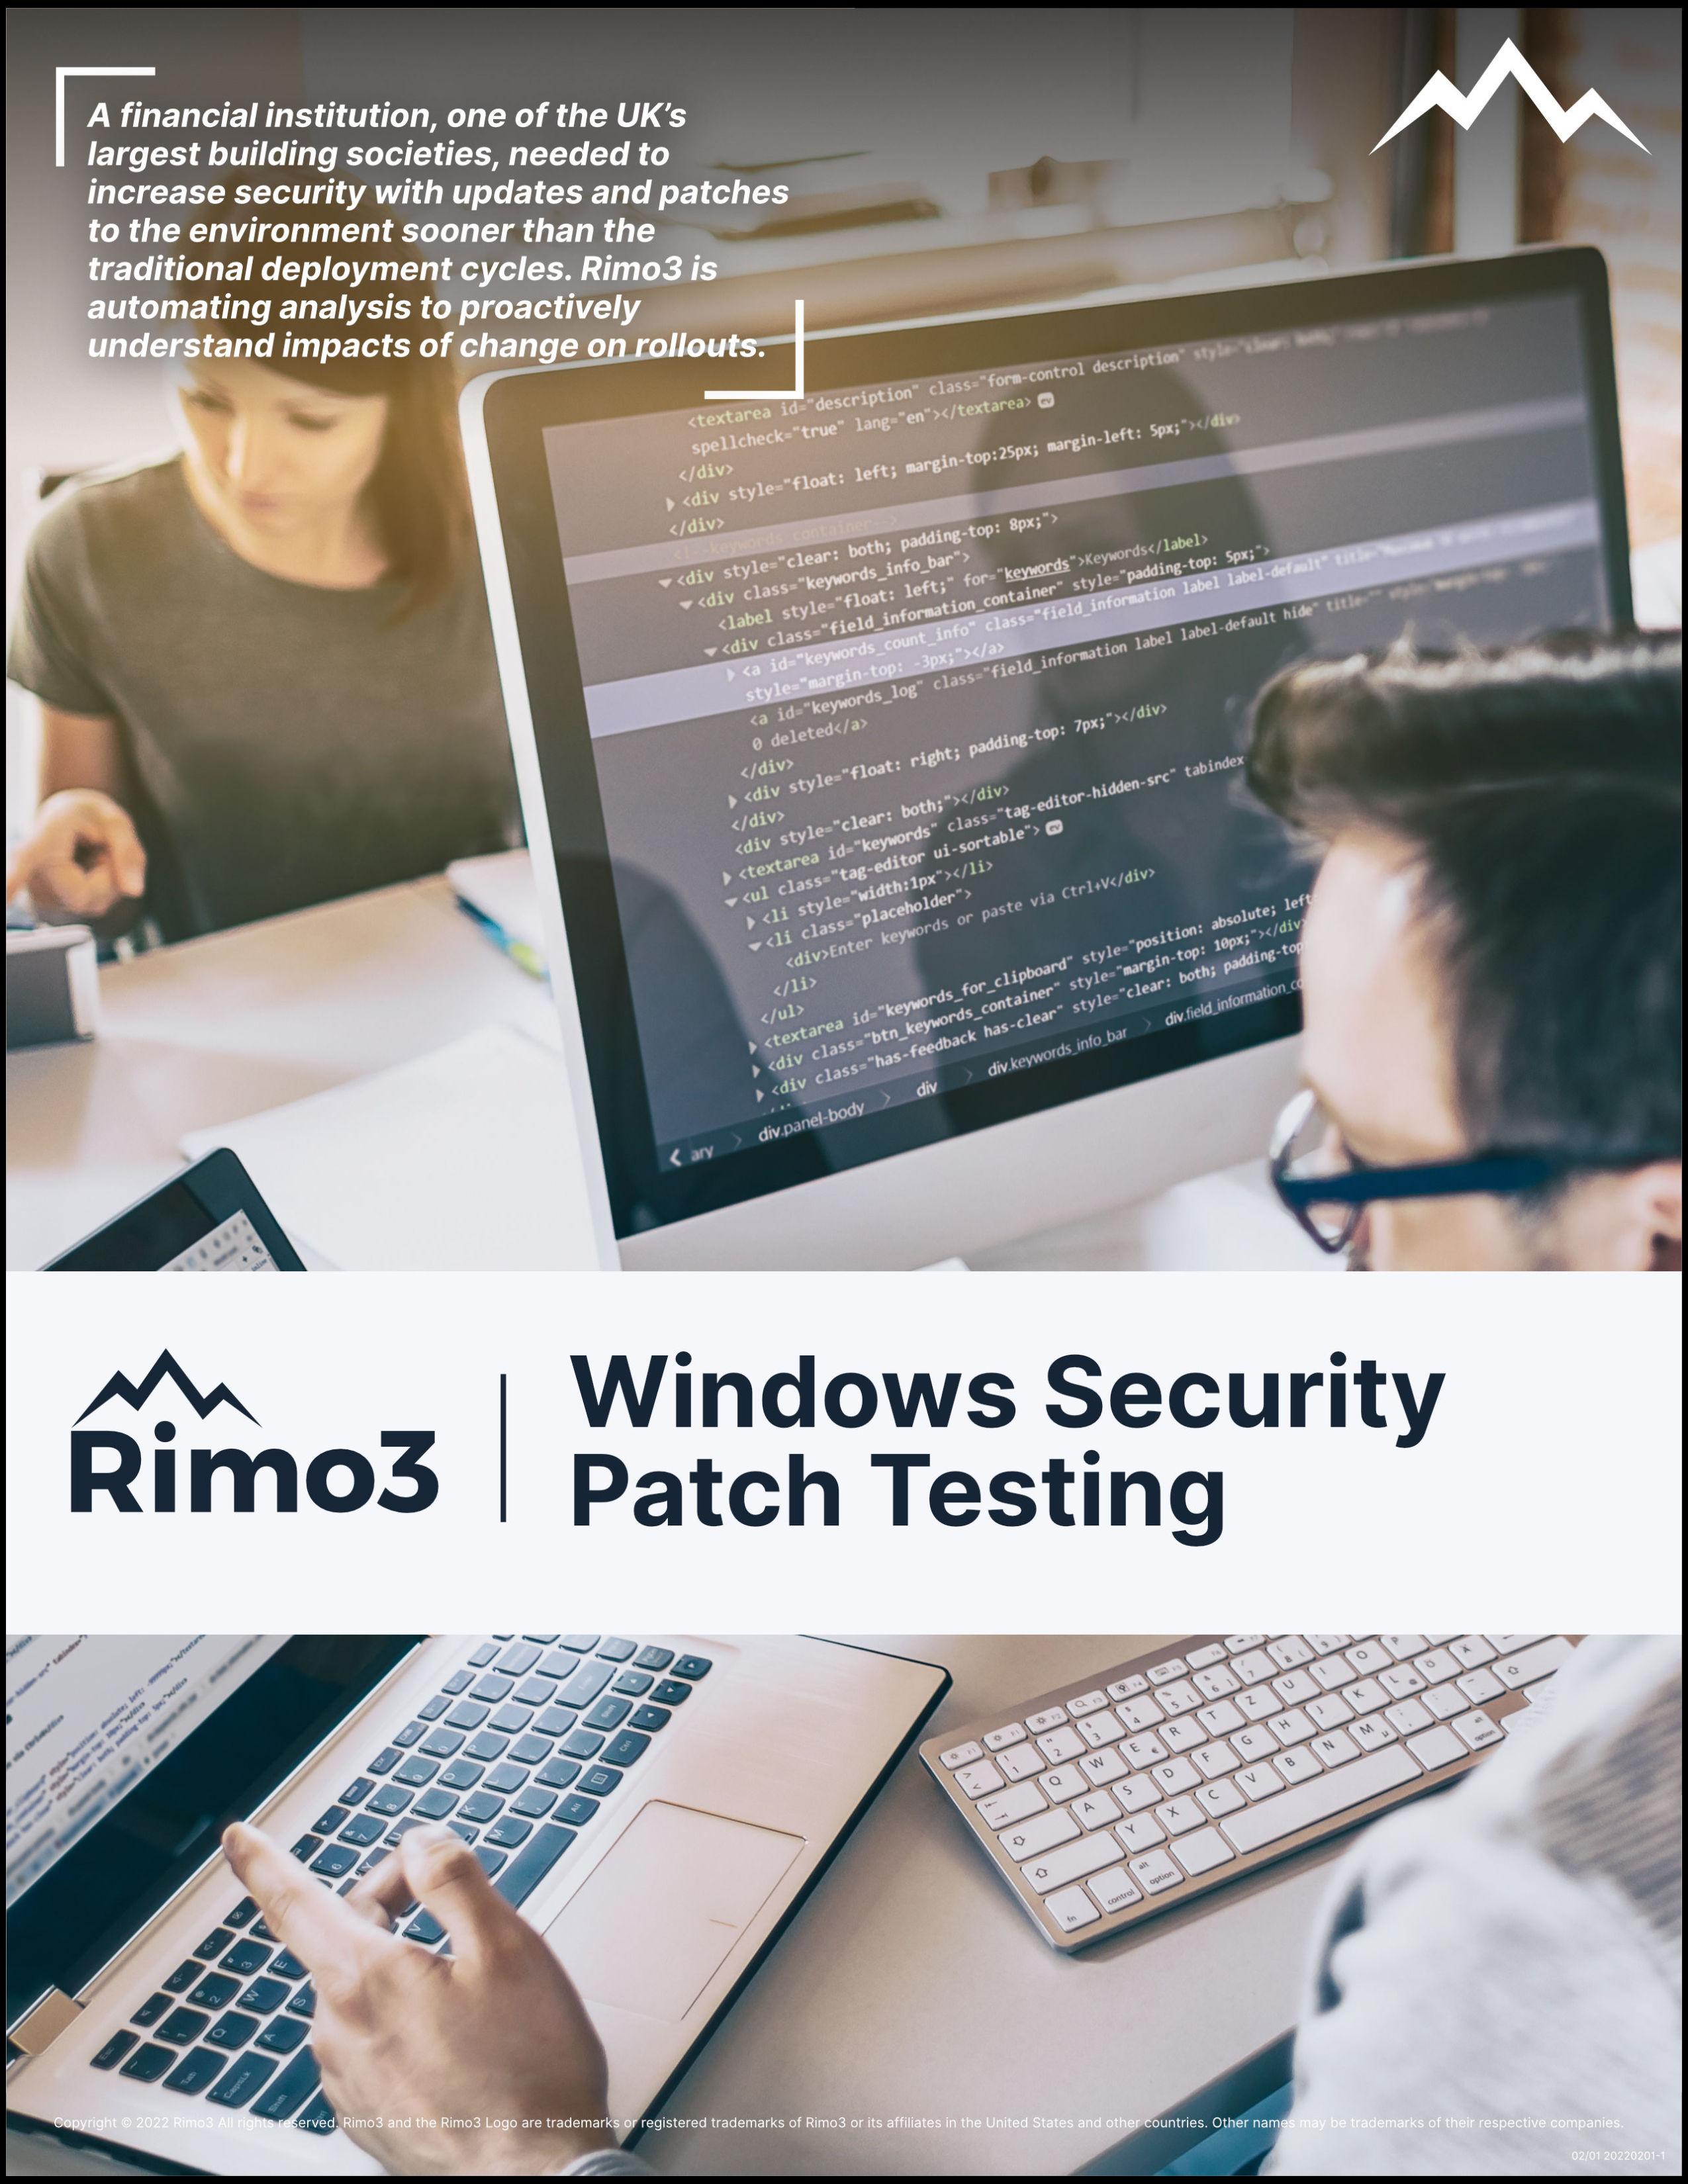 Rimo3 Windows Security Patch Testing Page 1-1